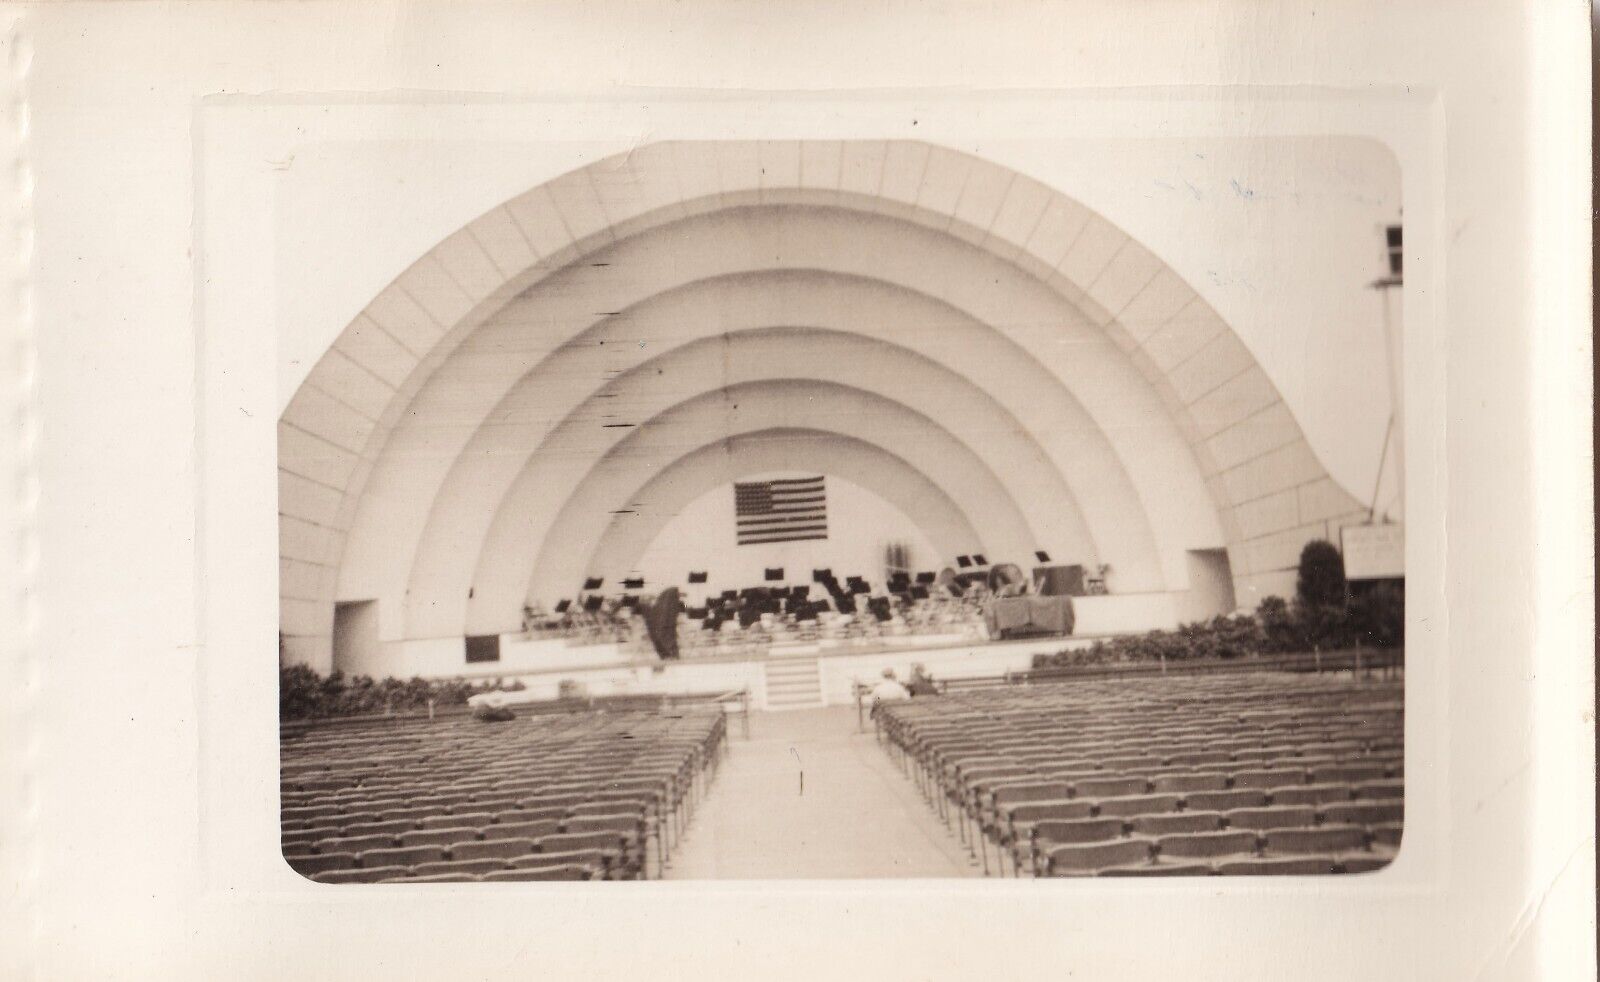 Vintage Found B&W Photograph Grant Park Band Stand Chicago, Illinois 1941